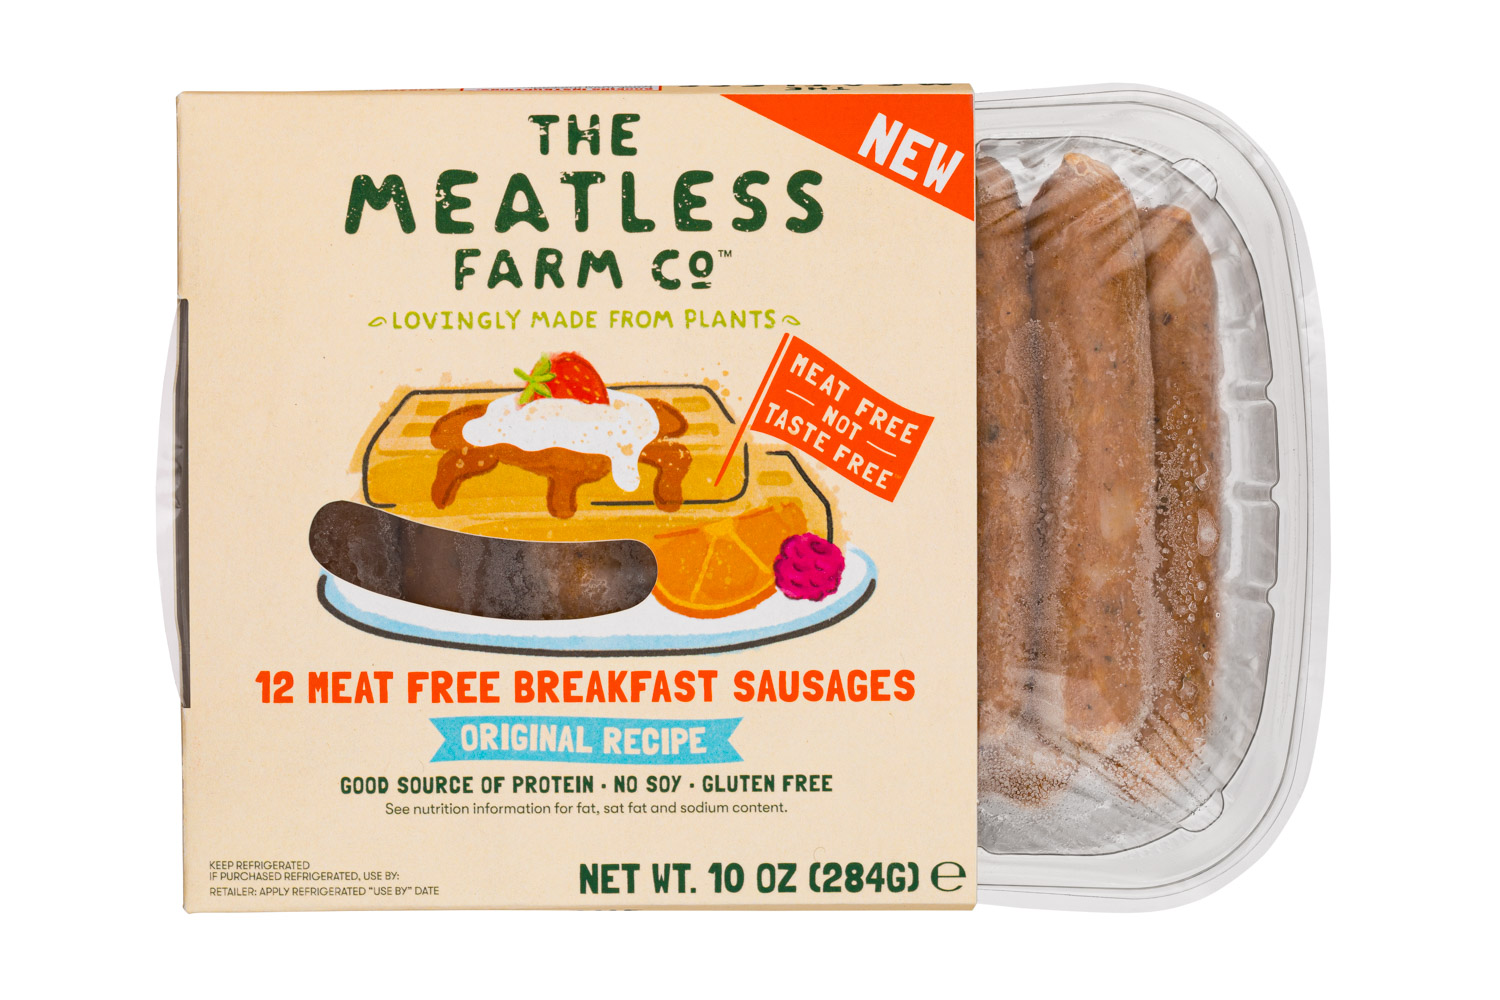 12 Meat Free Breakfast Sausages